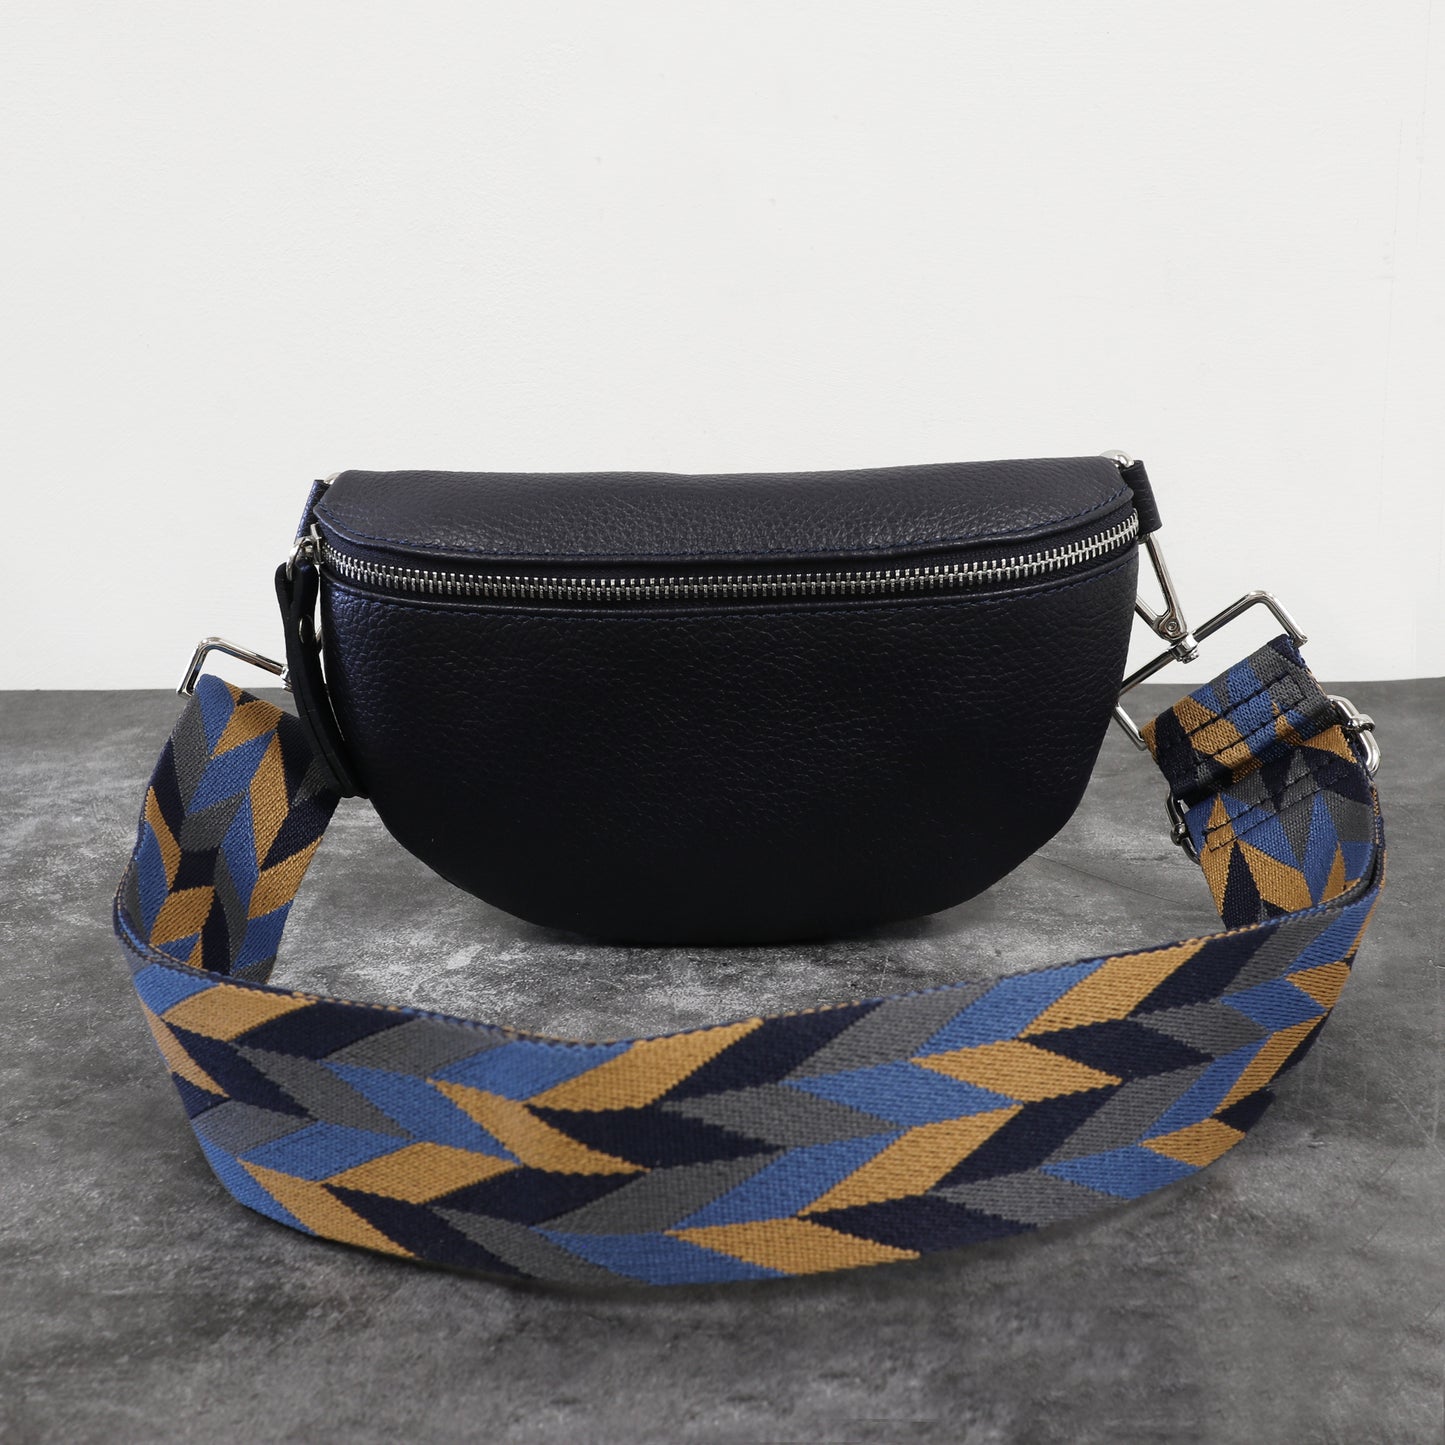 Leather Bum Bag with Patterned Strap – Navy Blue